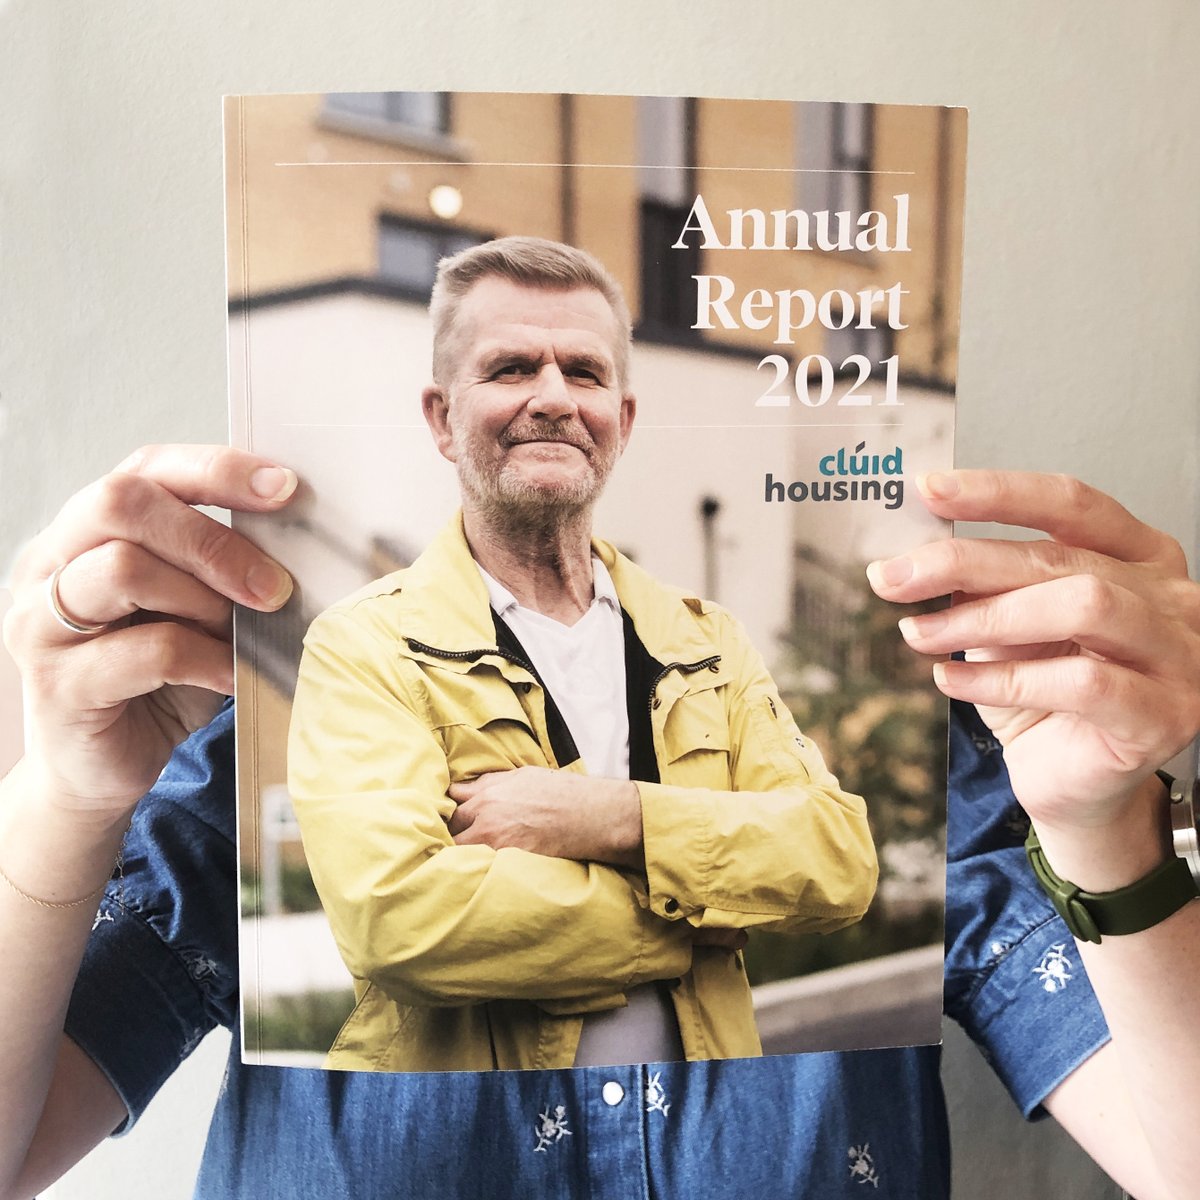 Best wishes to the team at @CluidHousing, who launched its 2021 Annual Report today. Last year it delivered 968 new homes and provided services to 3,300+ new residents, bringing its total number of homes to 9,000+. You can read more about Cluid's year at cluid.ie/report-home-20…